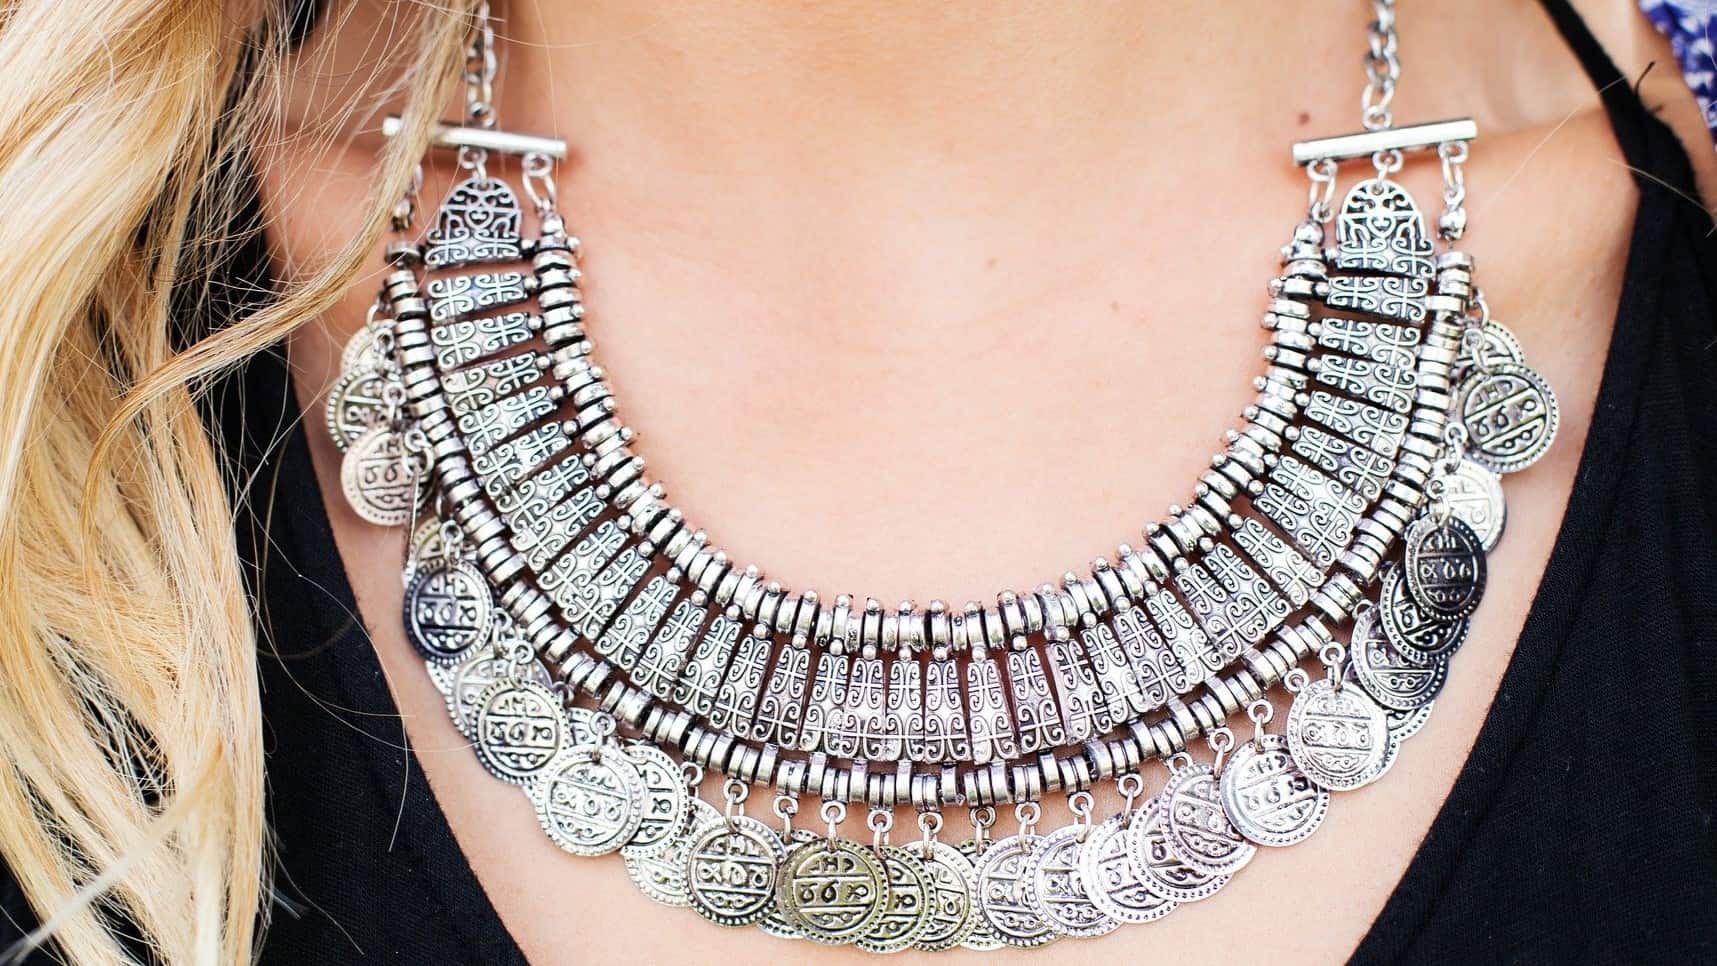 6 Ways to Properly Wear Your Silver Jewellery